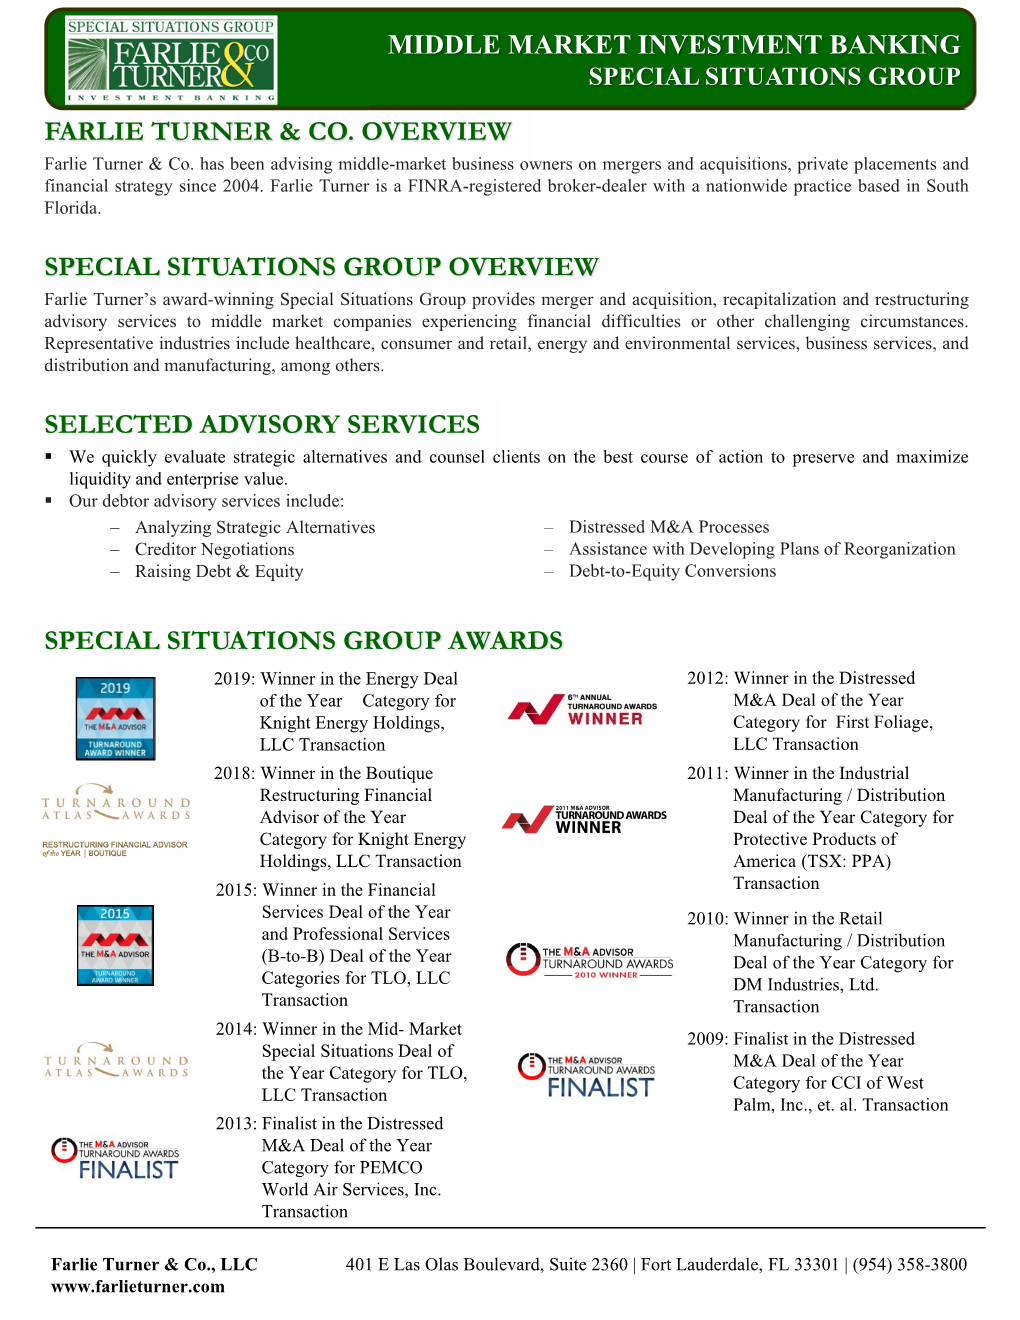 Farlie Turner & Co. Overview Special Situations Group